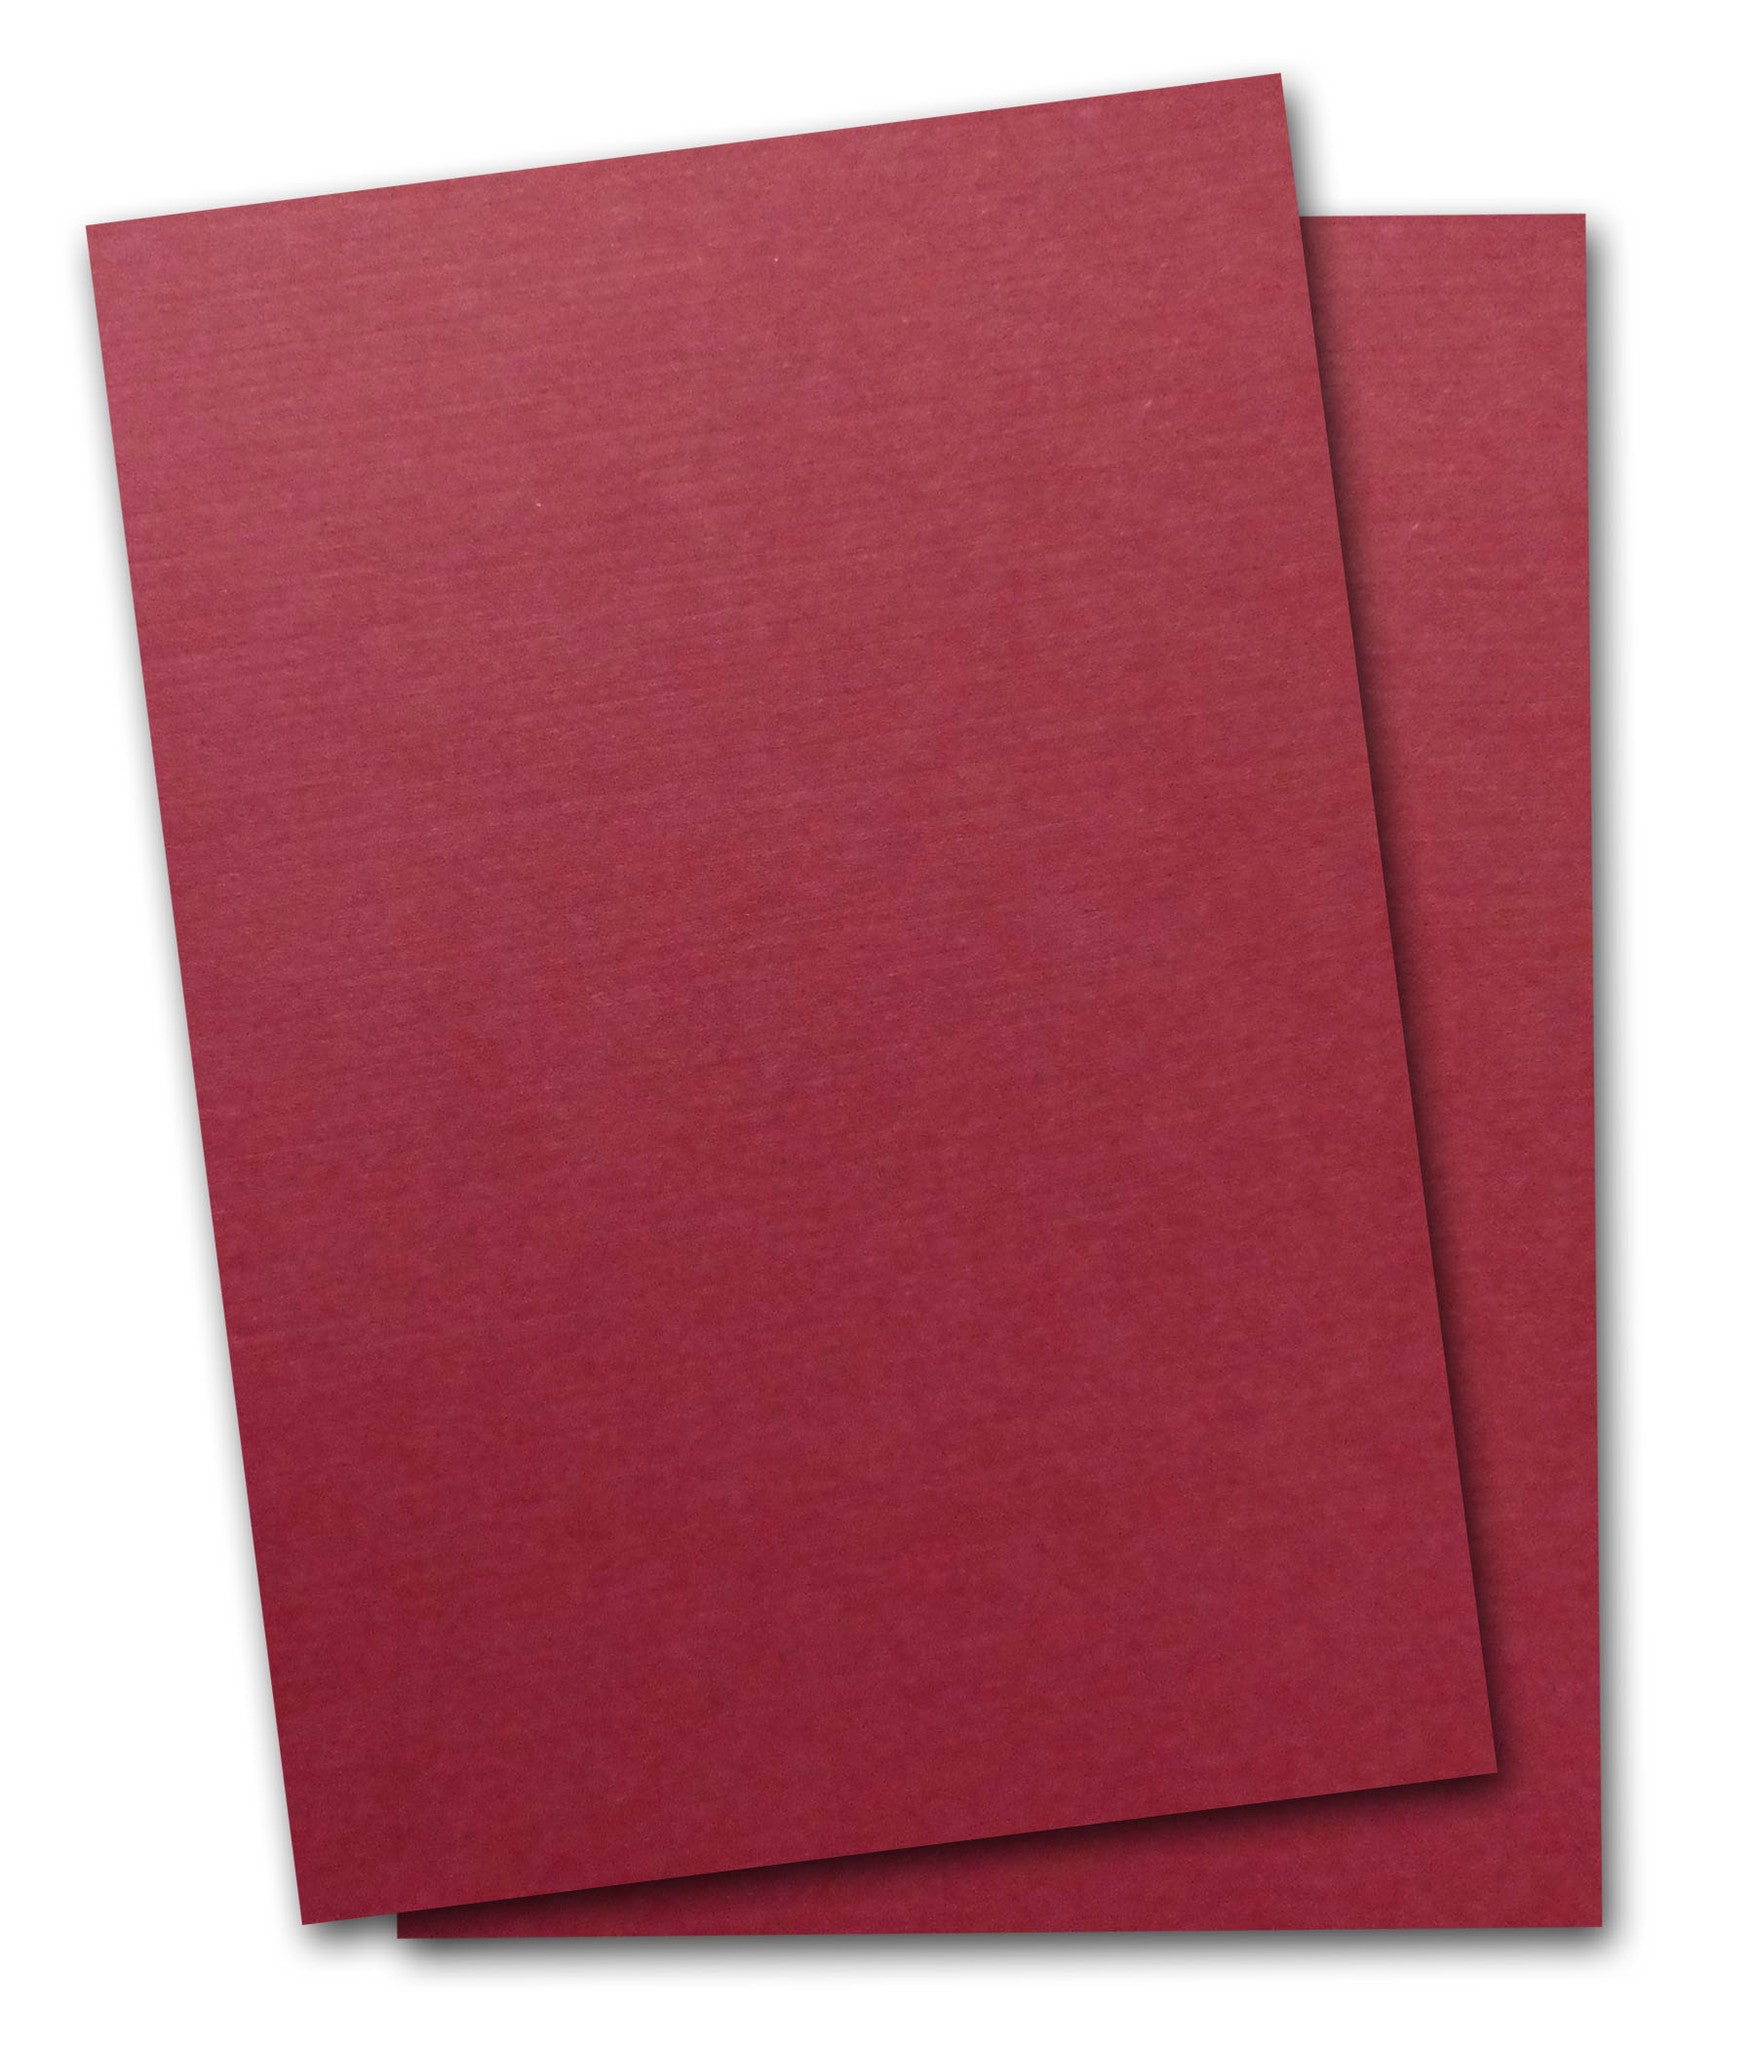 Ivory Linen Card Stock for DIY Invitations, menus, and brochures